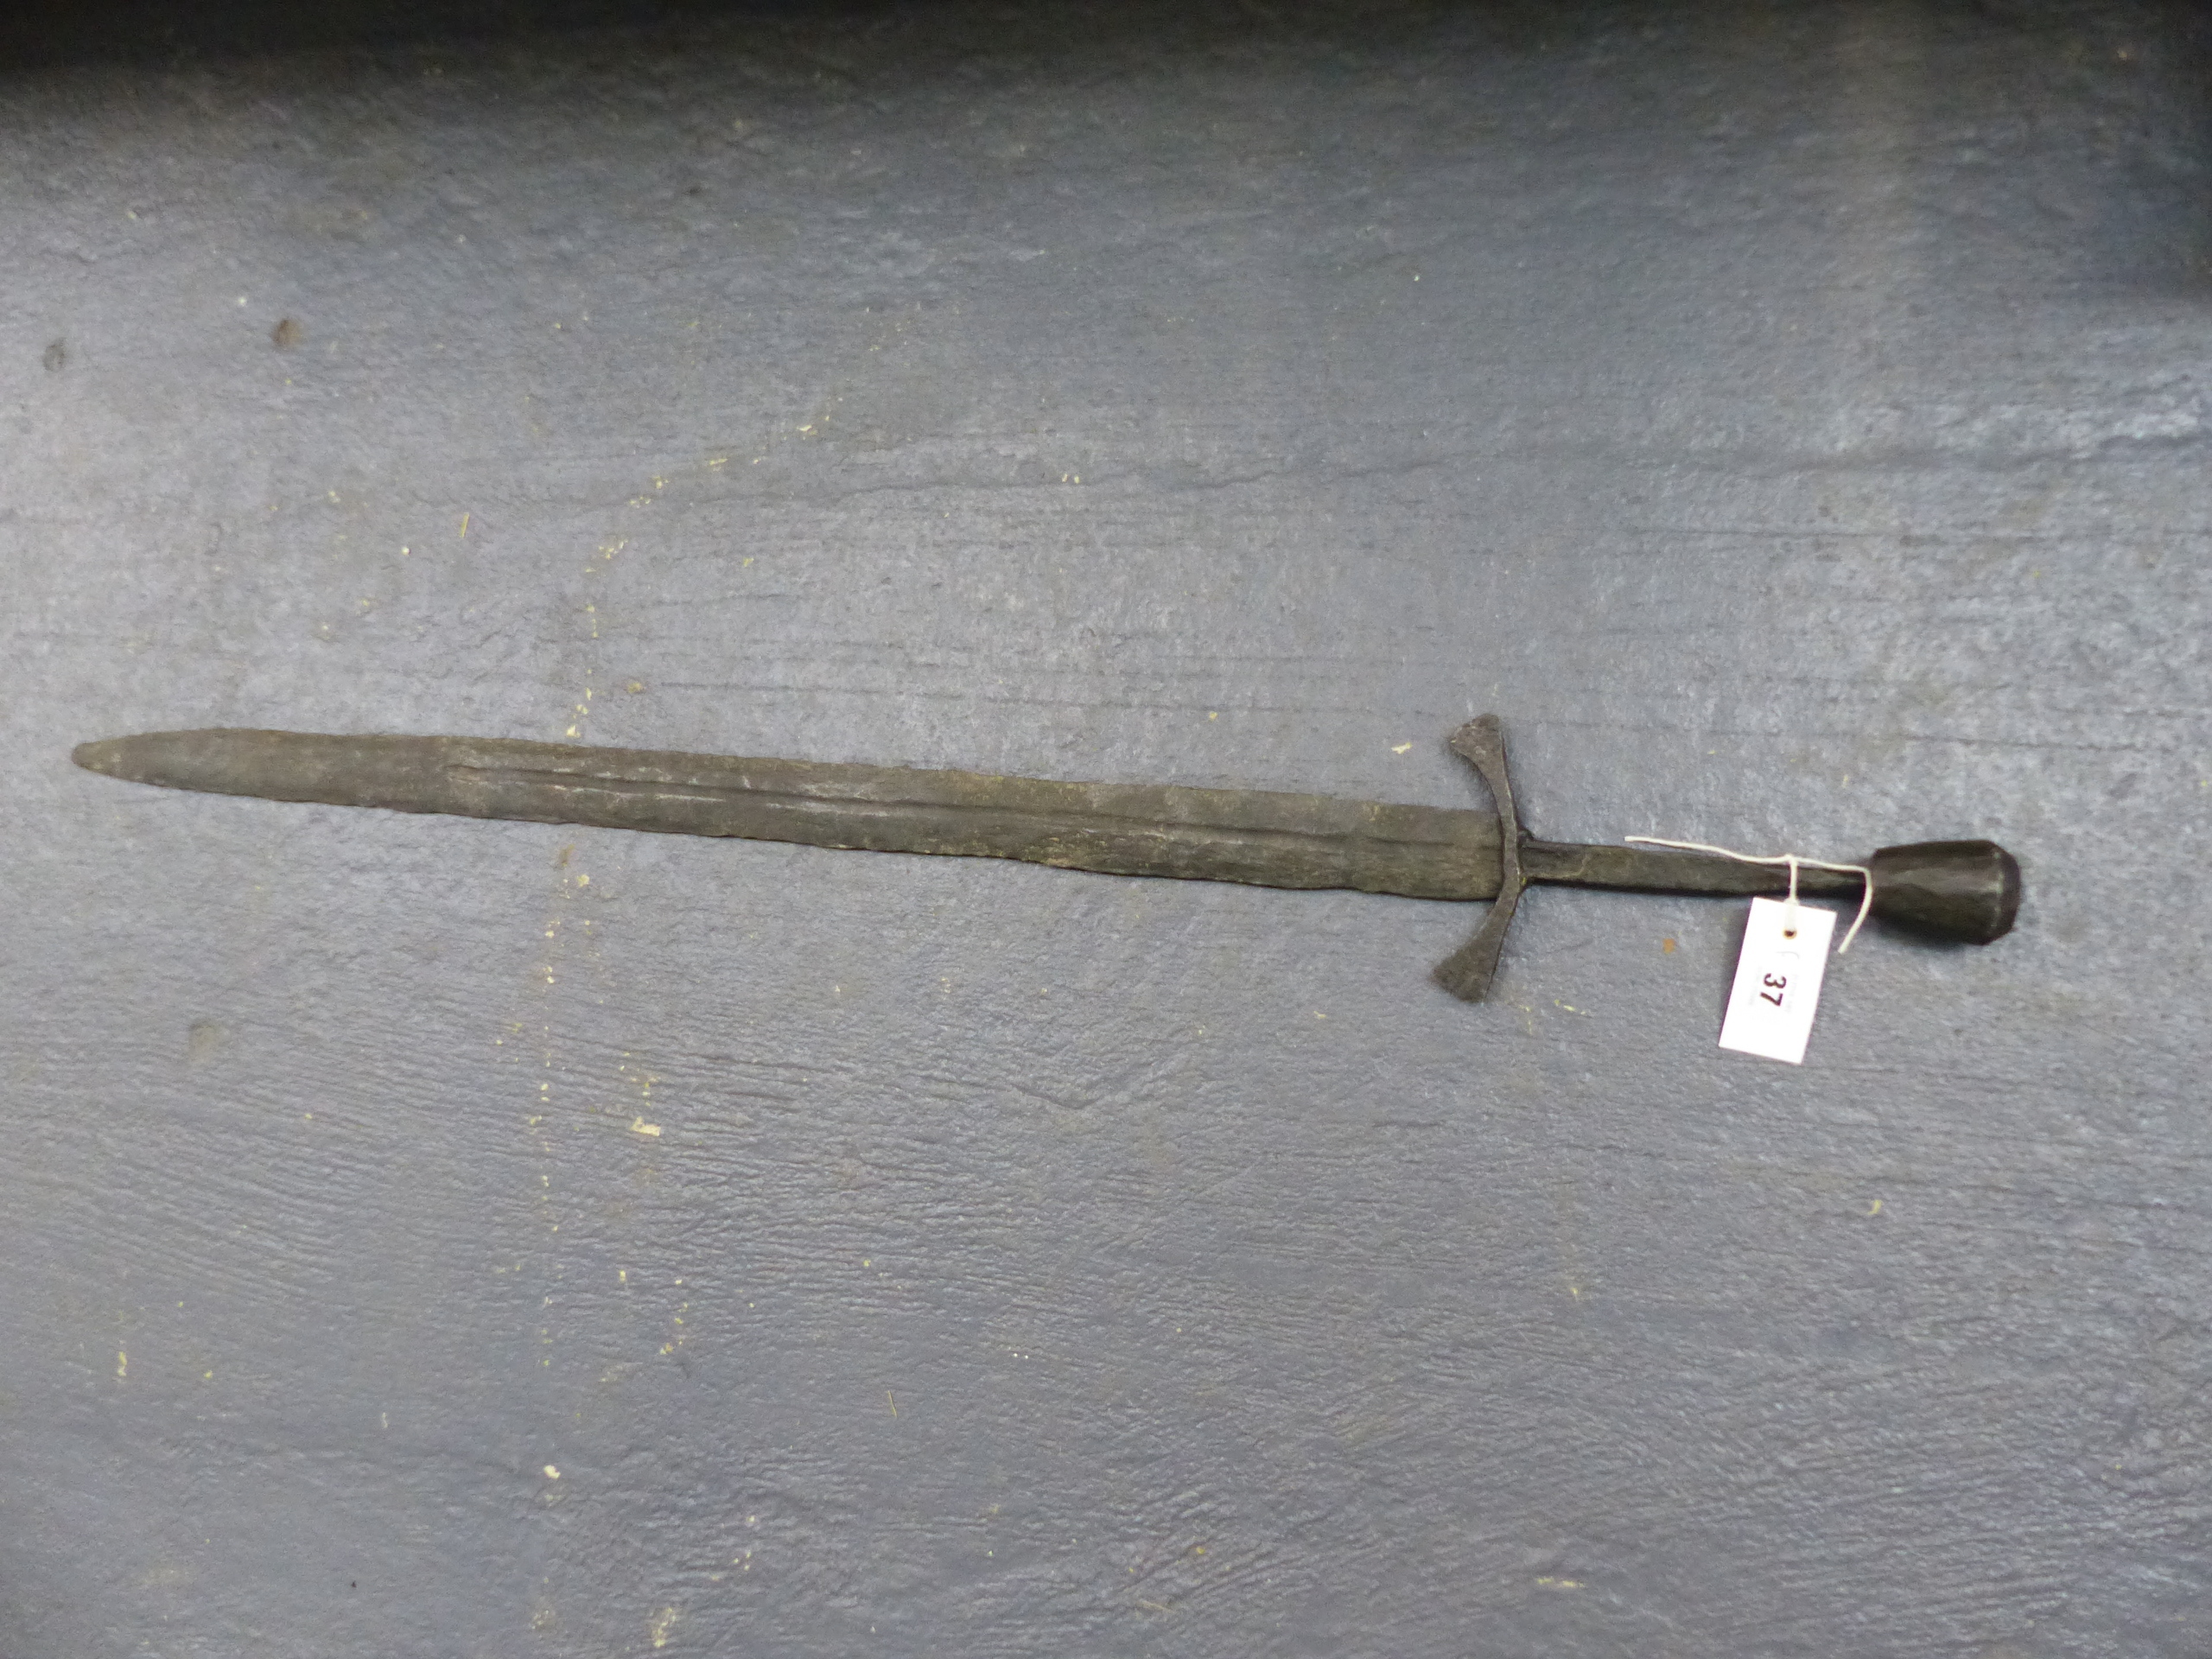 A LARGE MEDIEVAL TYPE BROADSWORD IN RELIC CONDITION